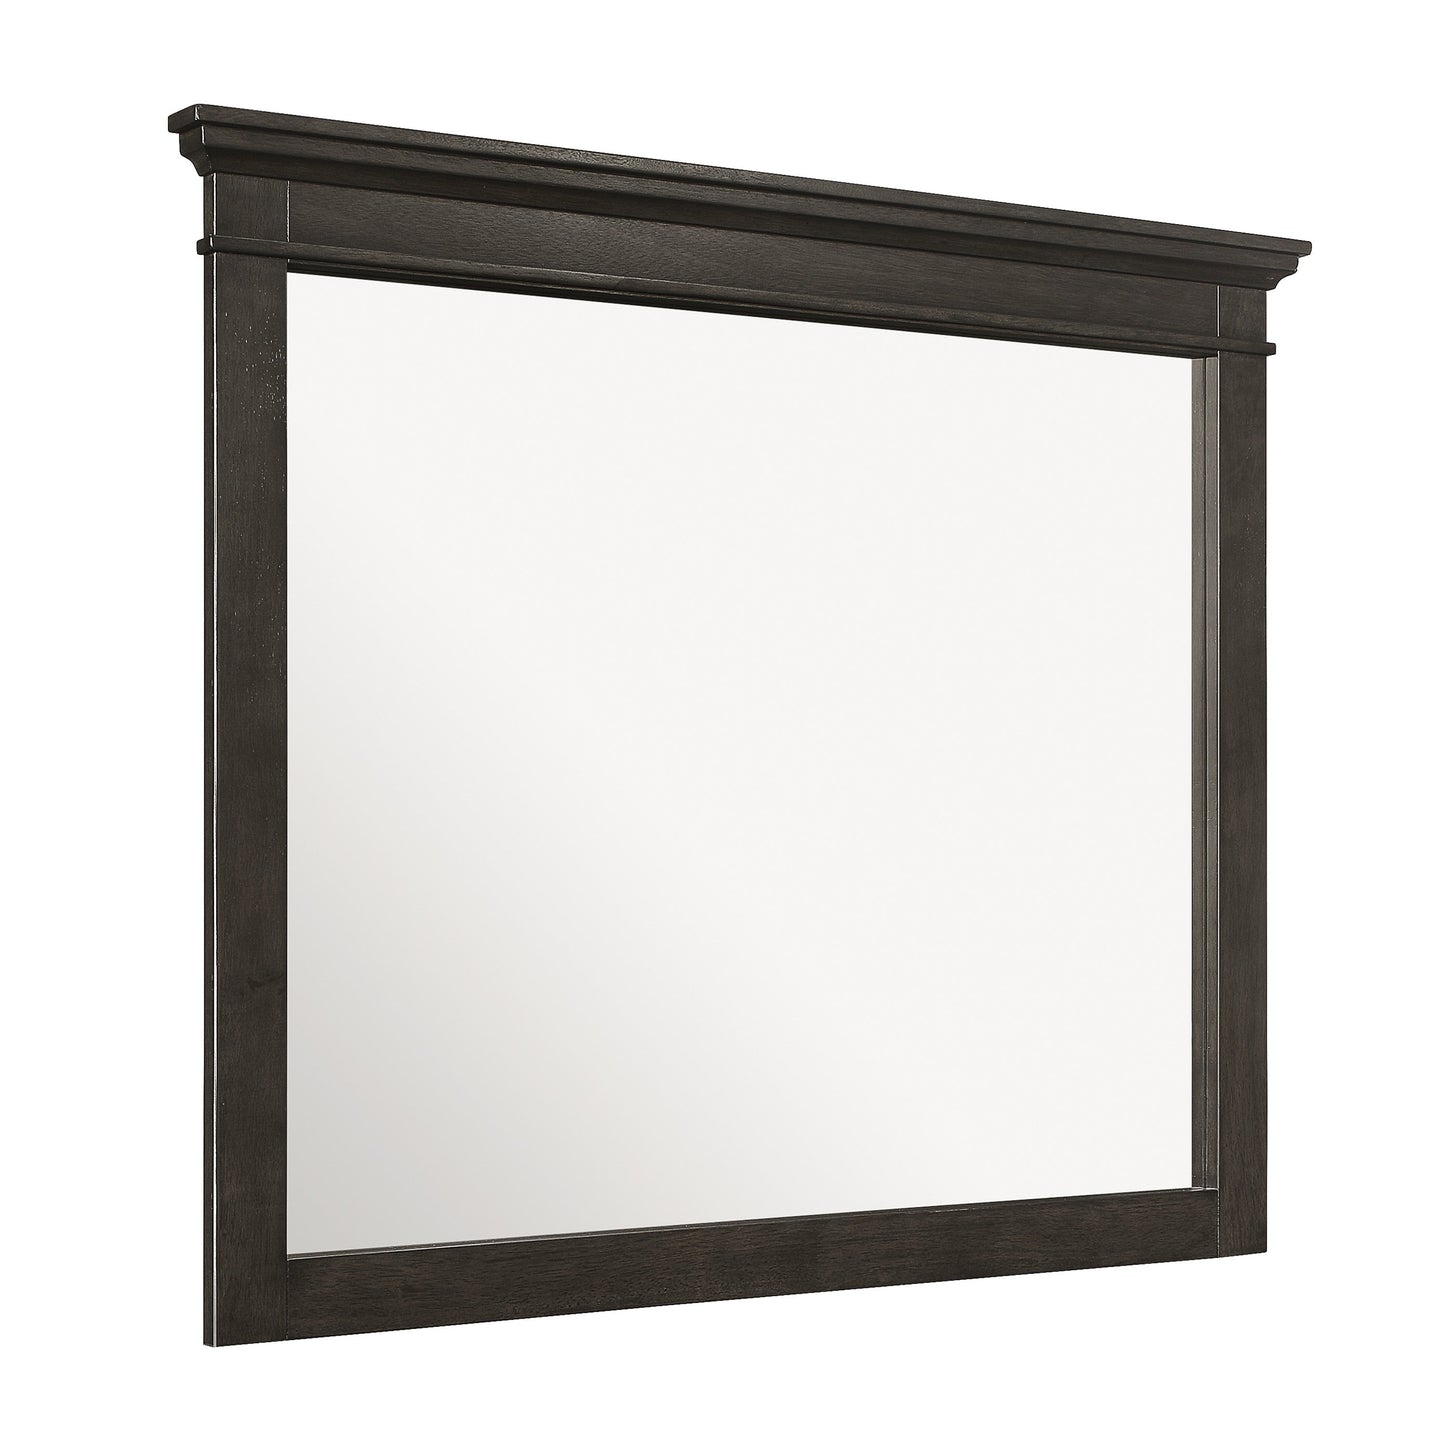 Blaire Farm Charcoal Gray Mirror (Mirror Only)